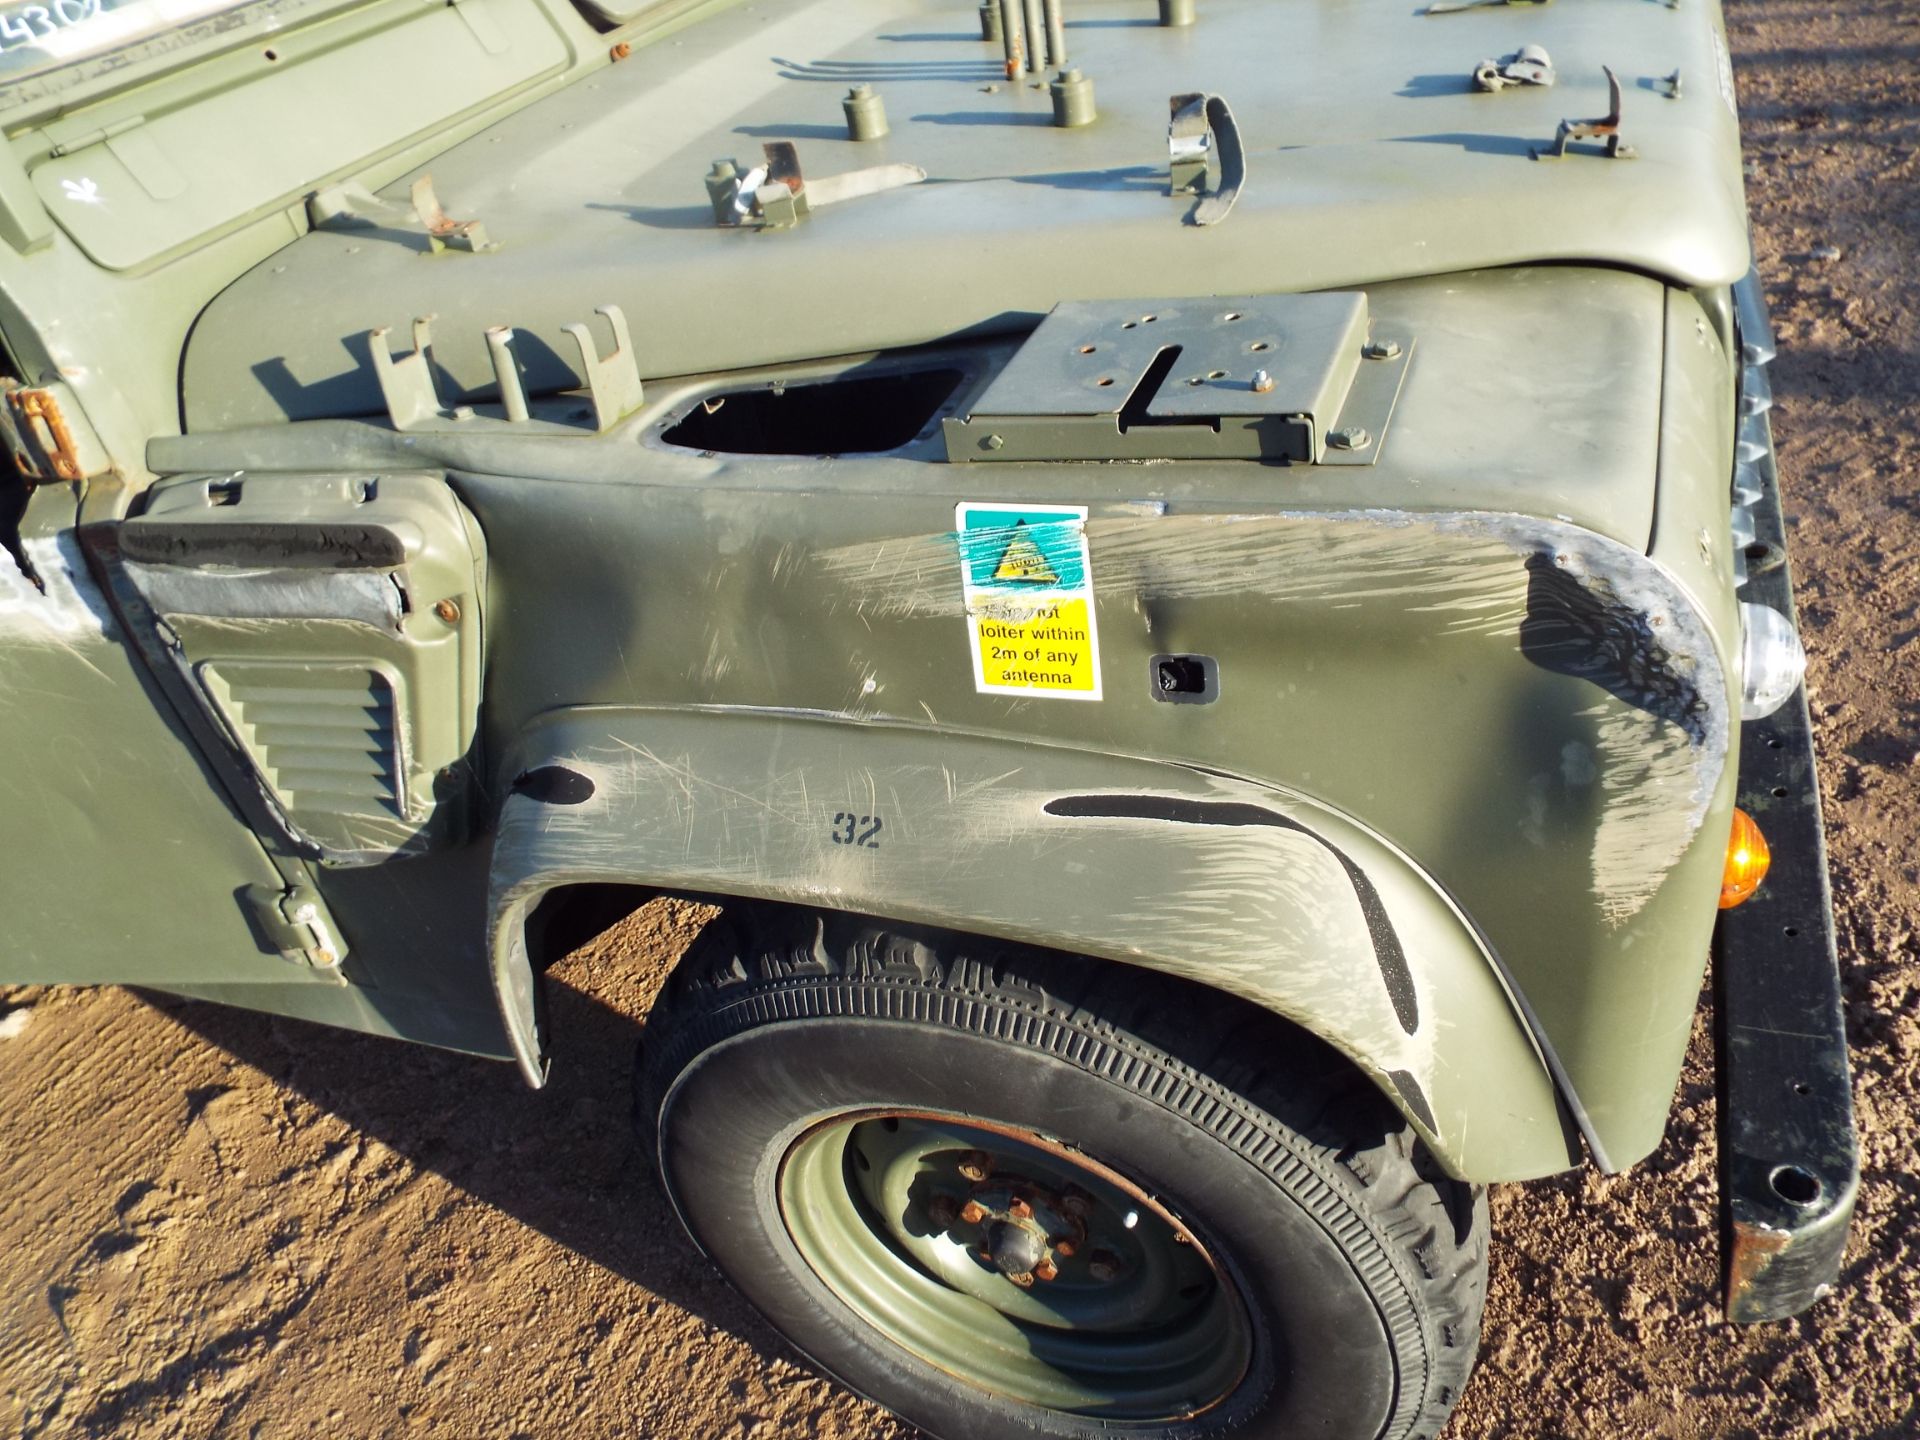 Military Specification Land Rover Wolf 110 Hard Top - Image 20 of 22